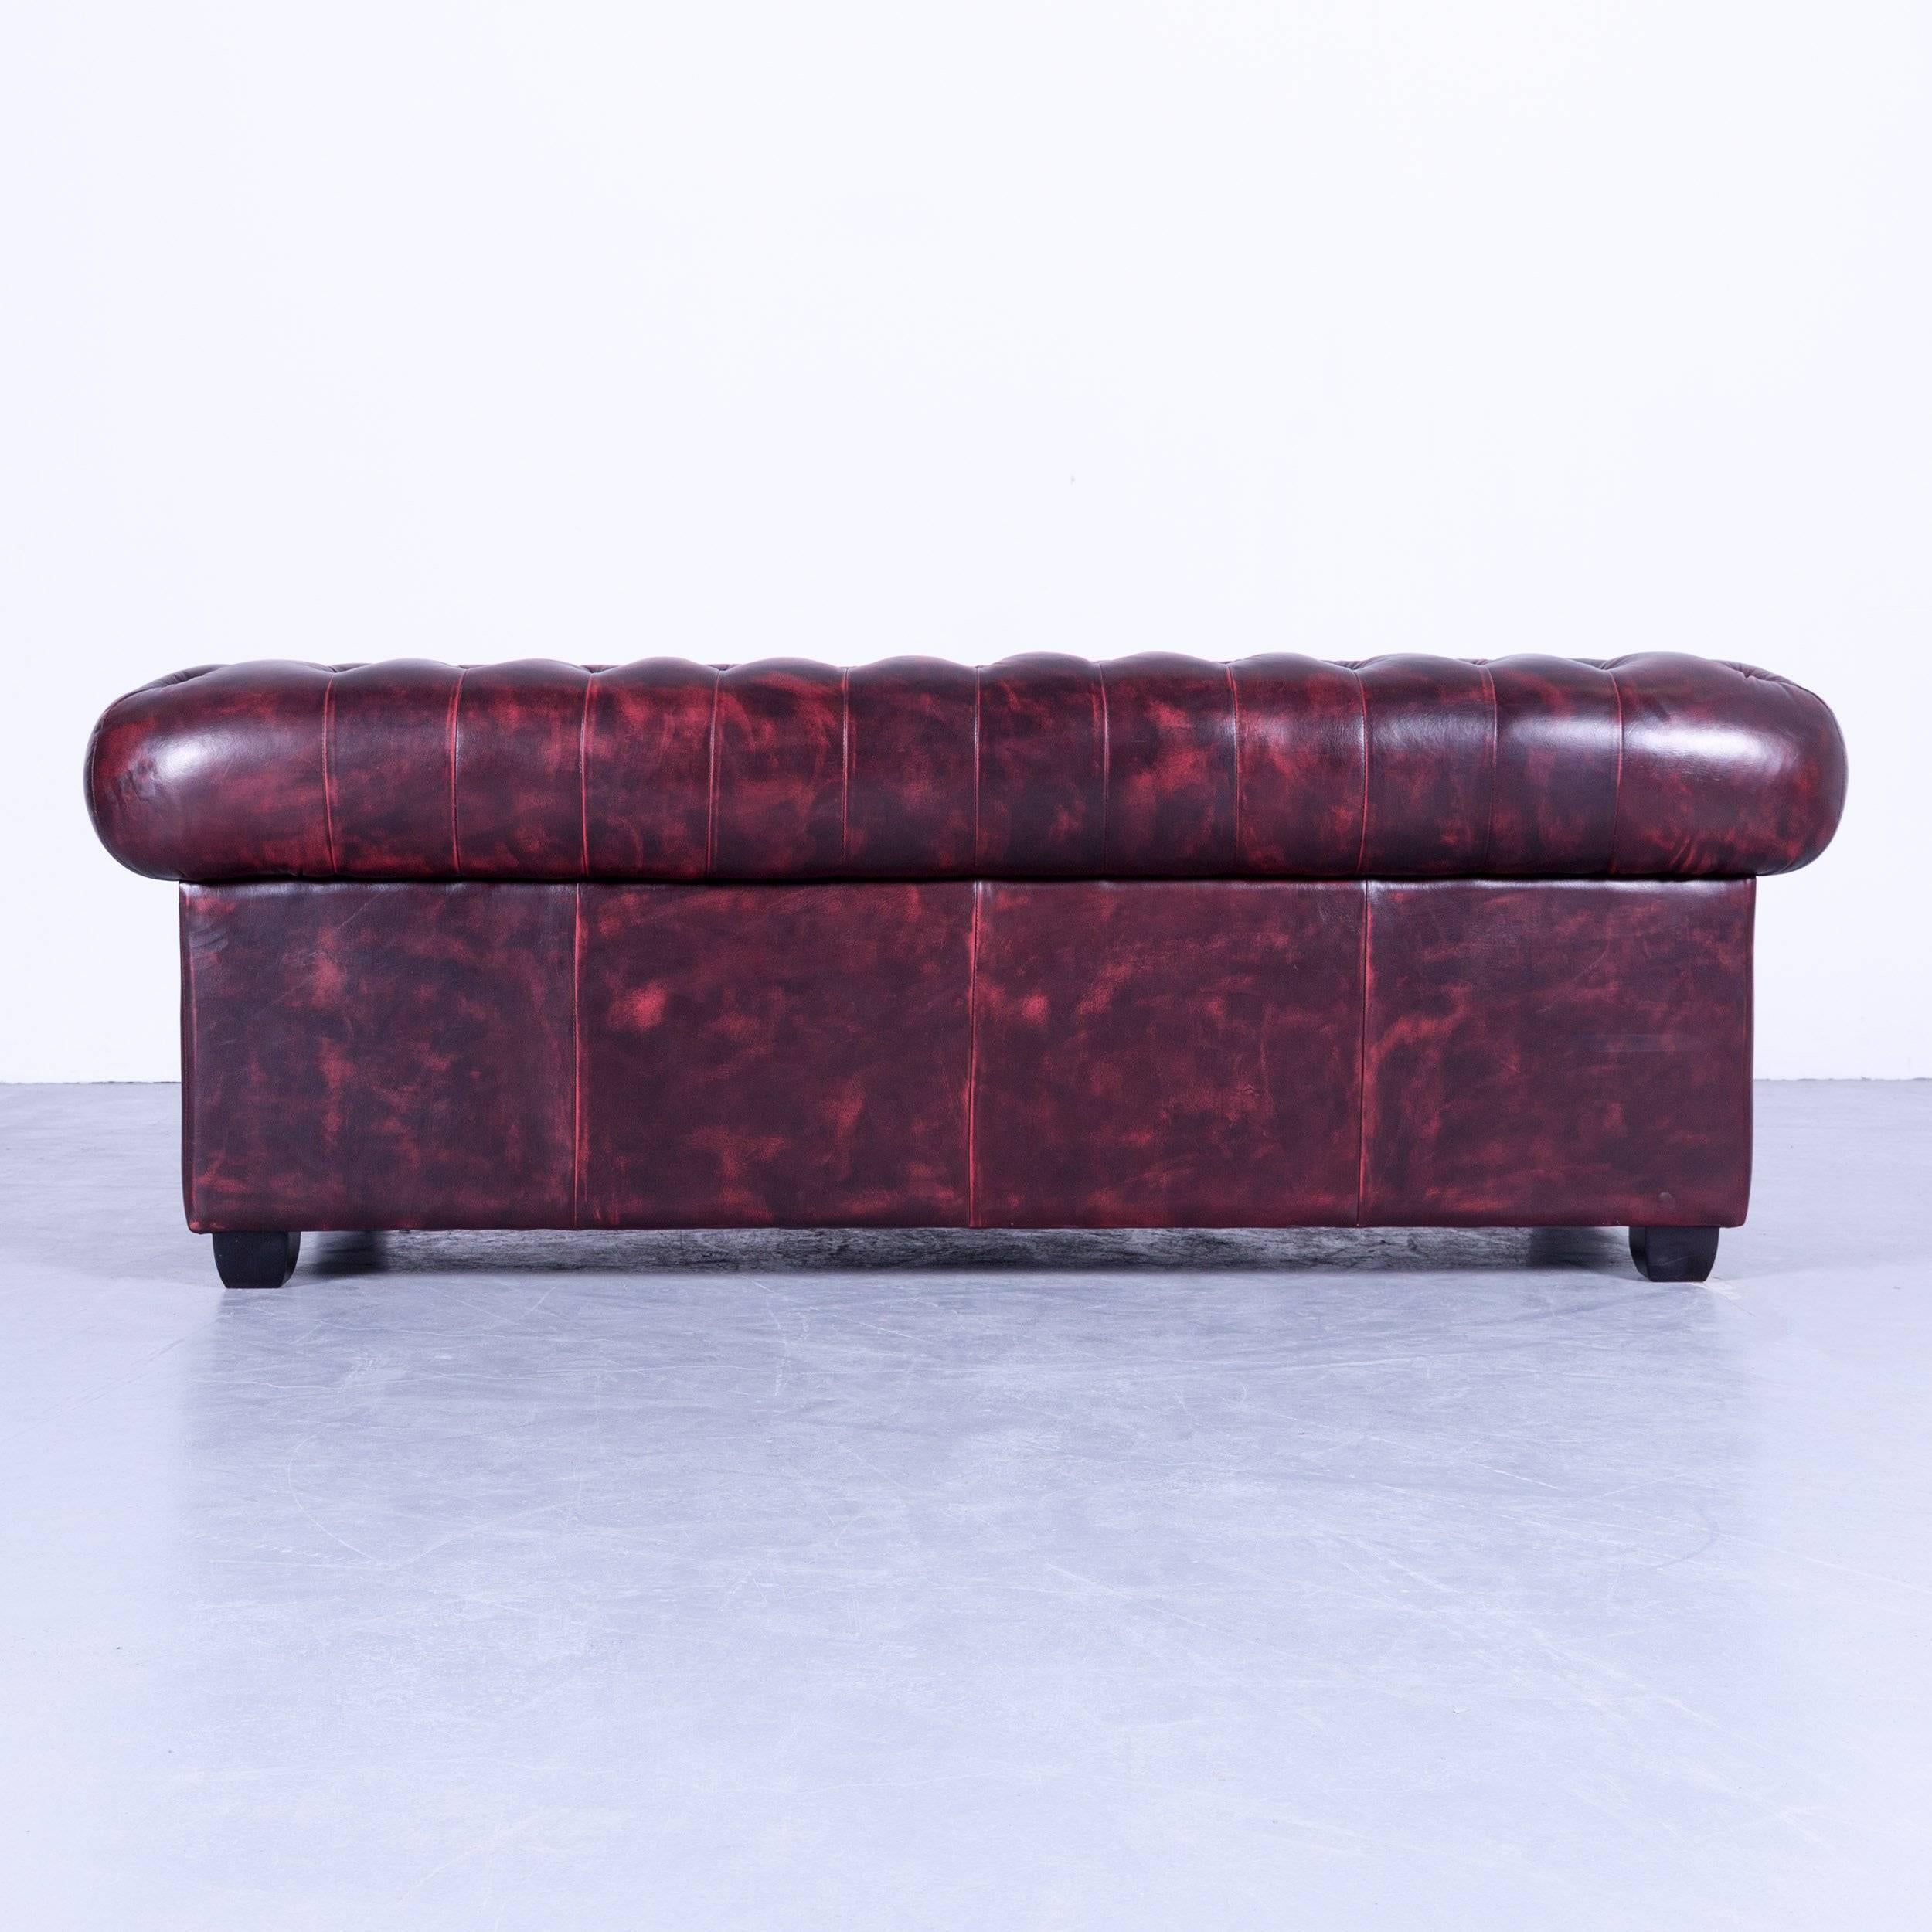 Contemporary Chesterfield Sofa Oxblood Red Three-Seat Couch Vintage Retro Handmade Rivets